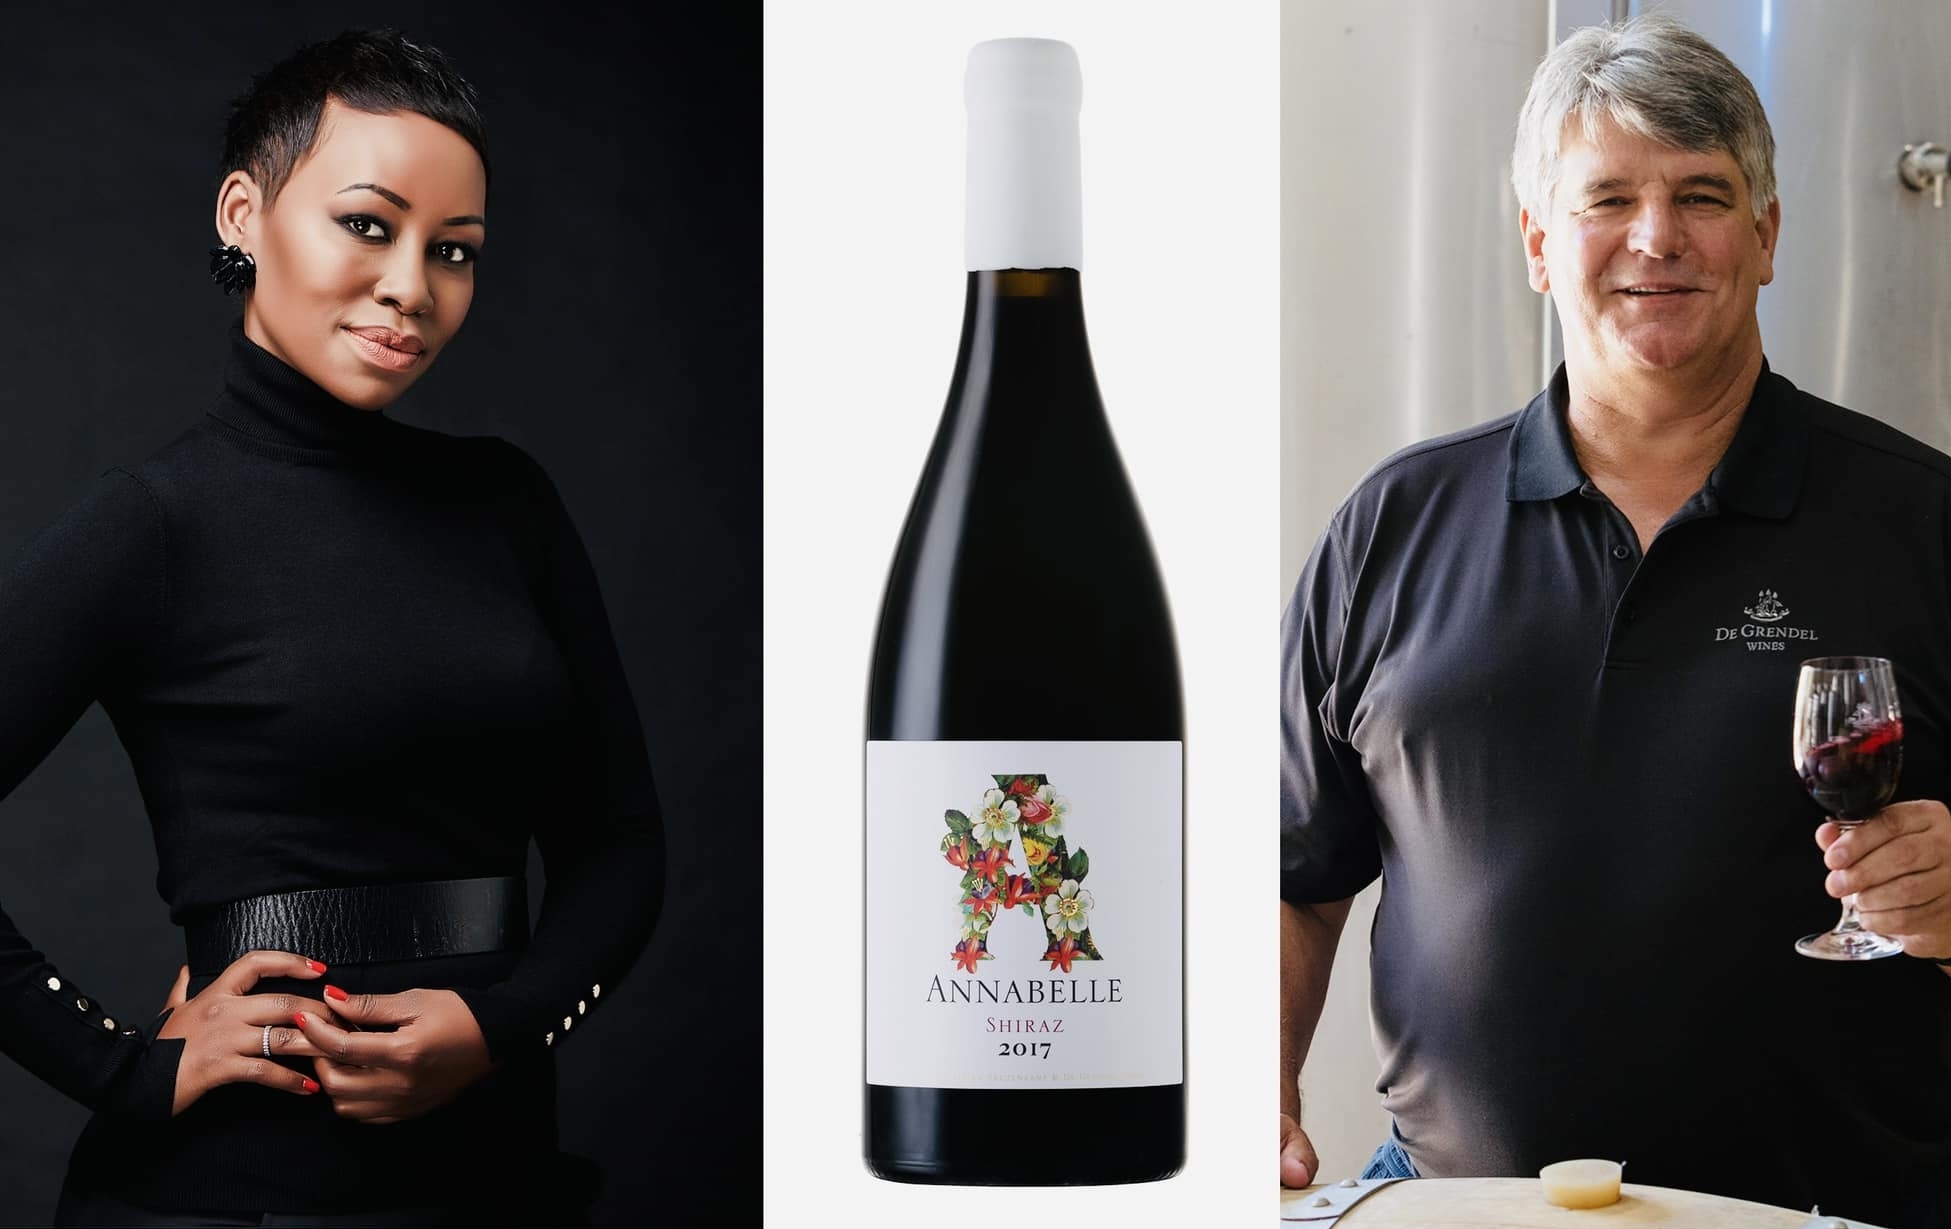 Elana Afrika-Bredenkamp has partnered with De Grendel Wine Estate to launch Annabelle Shiraz, a wine with a cause, funding sommelier training for underprivileged individuals.